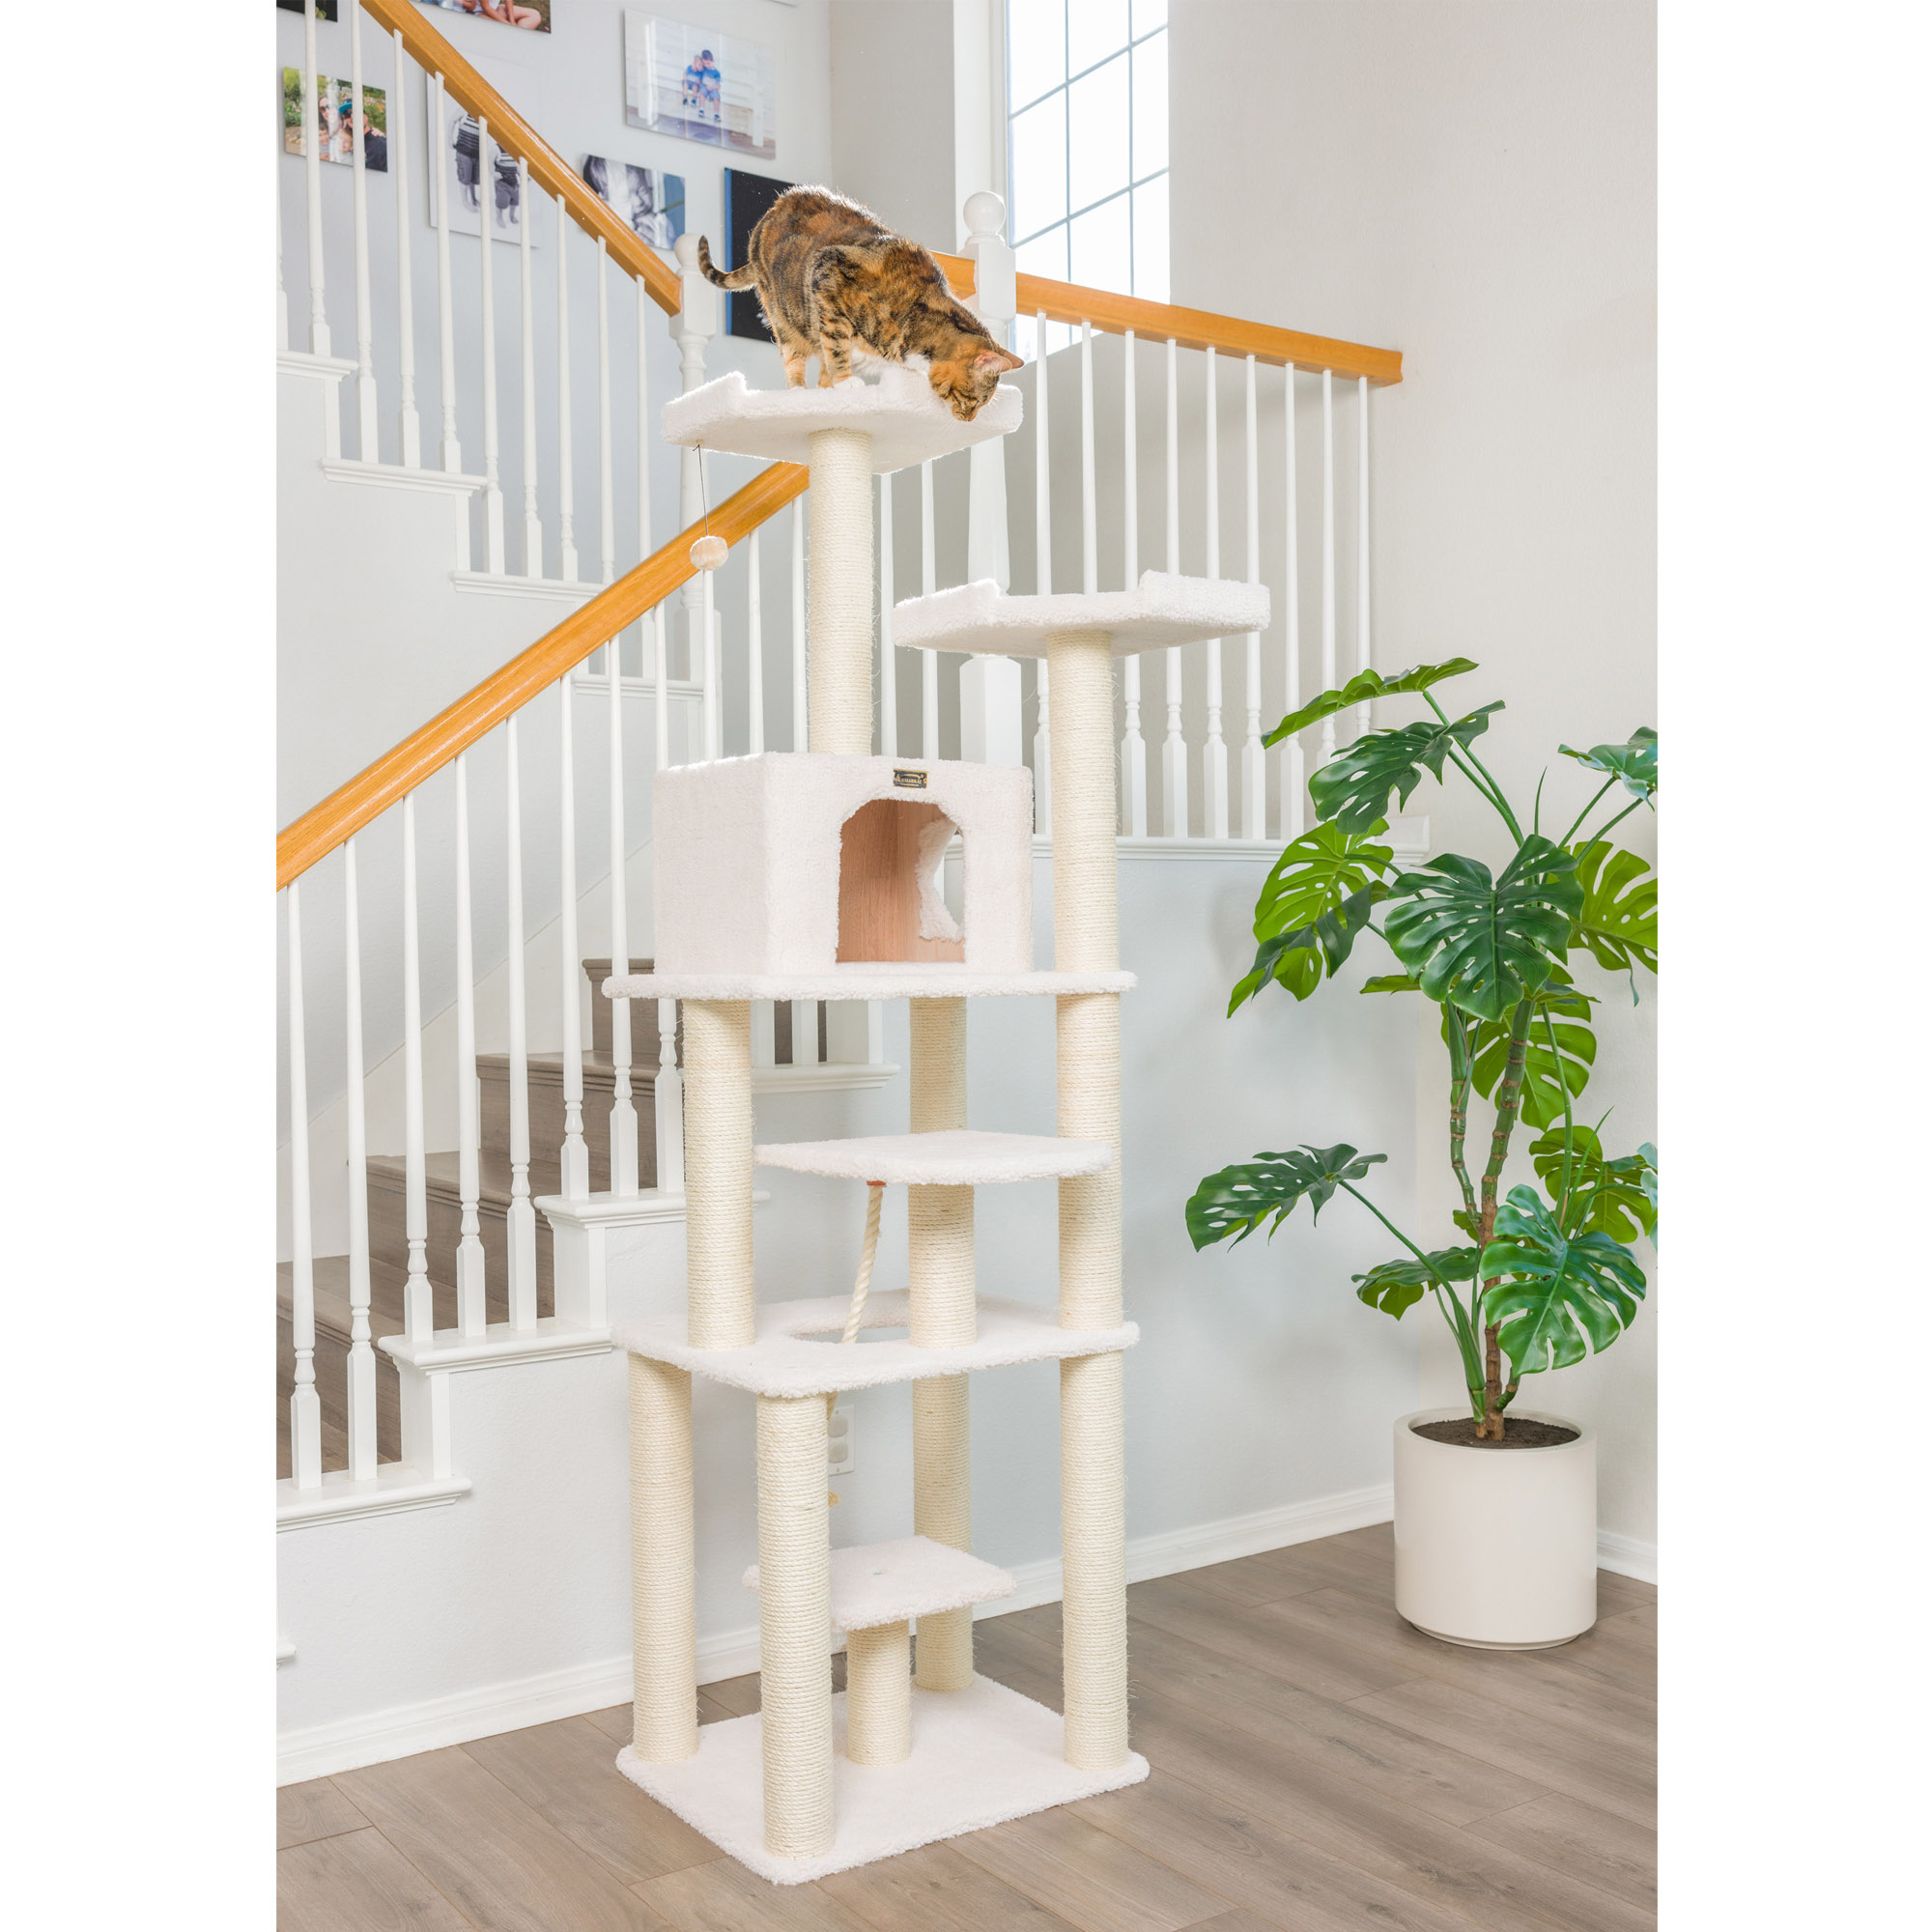 Armarkat 78-in real wood Cat Tree & Condo Scratching Post Tower, Beige - image 2 of 10